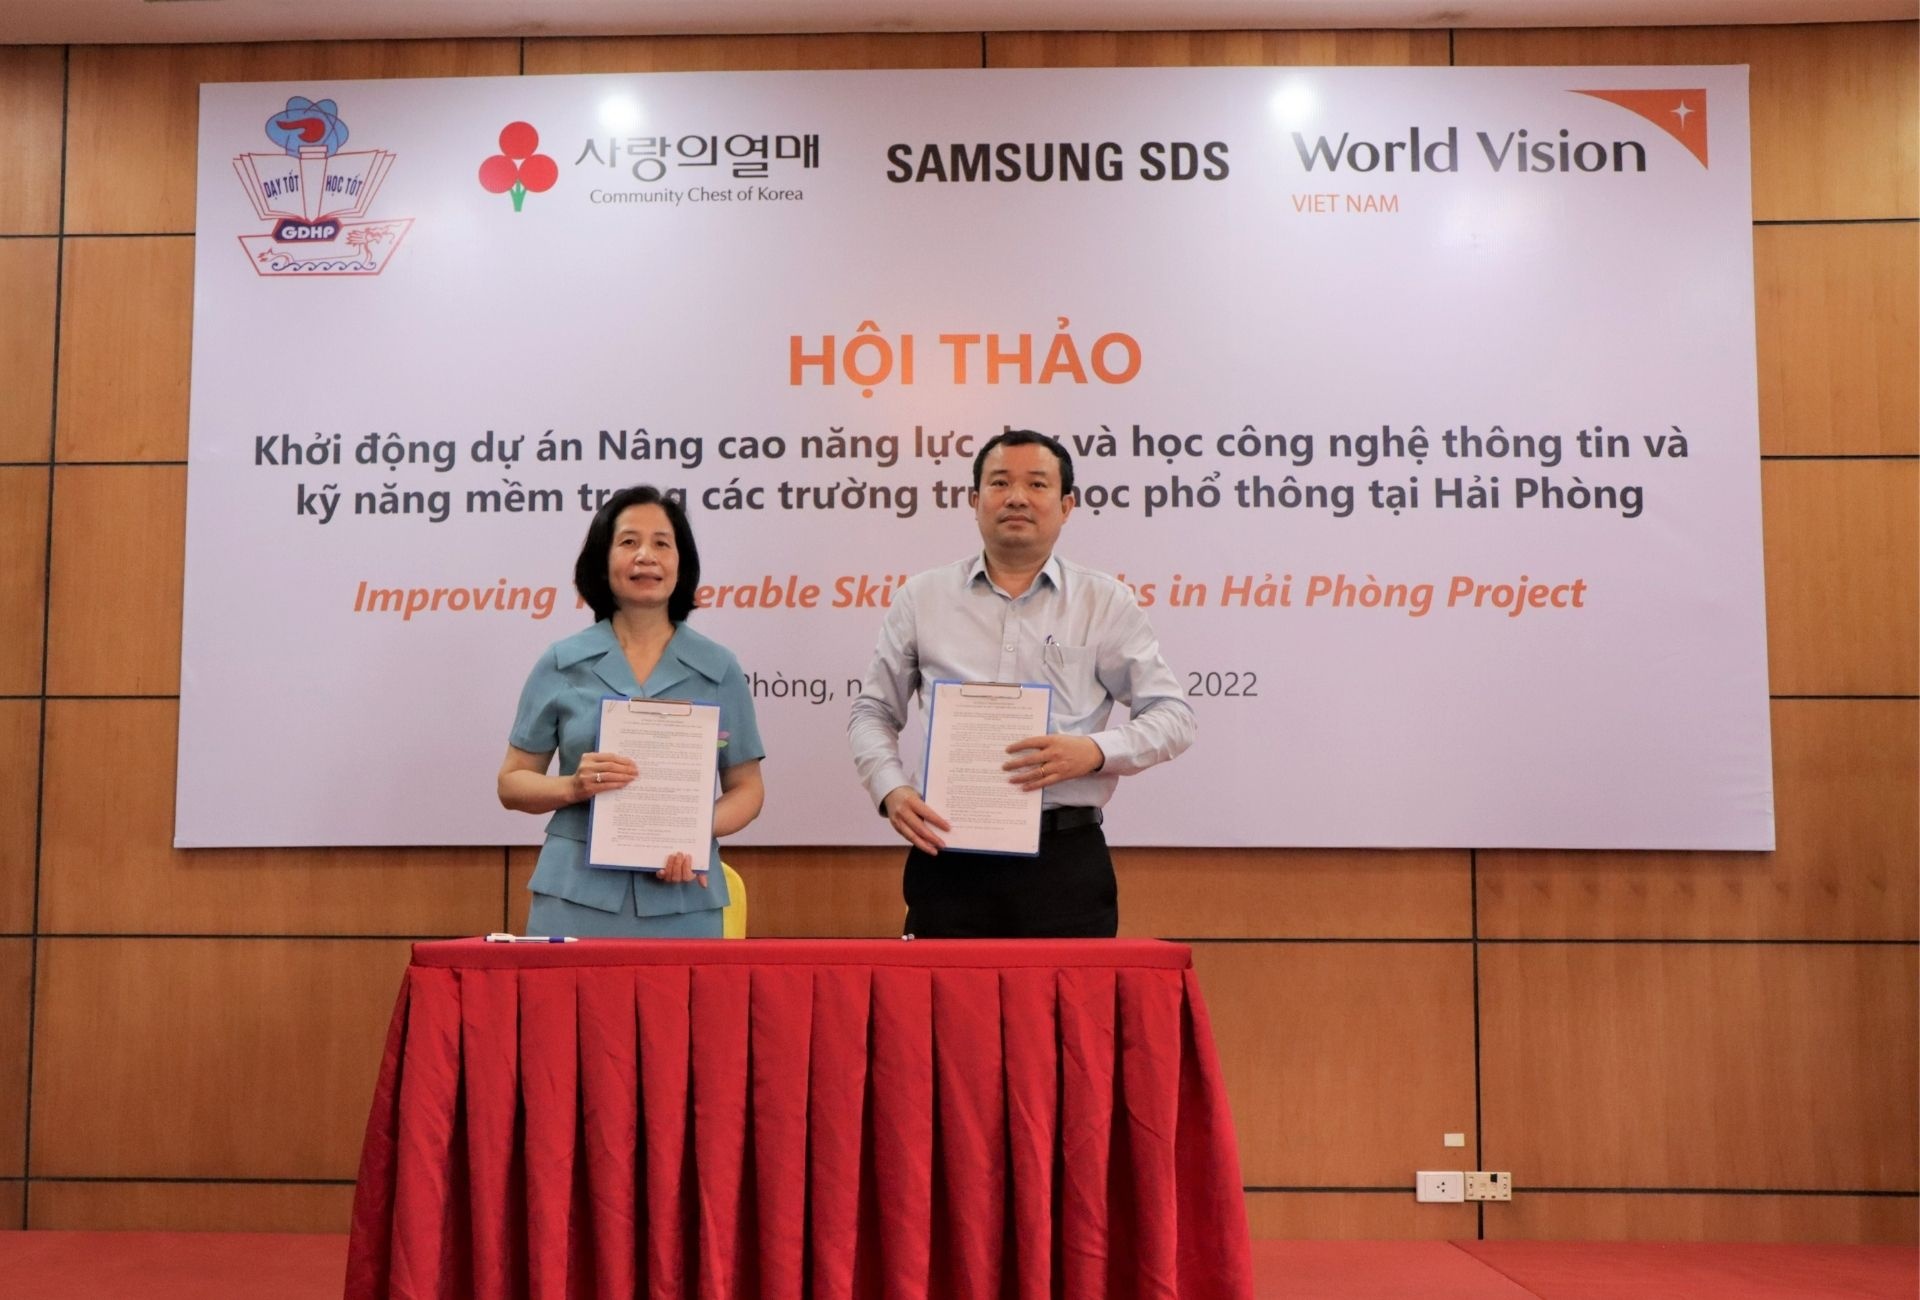 Improving Transferable Skills for Youth in Hải Phòng